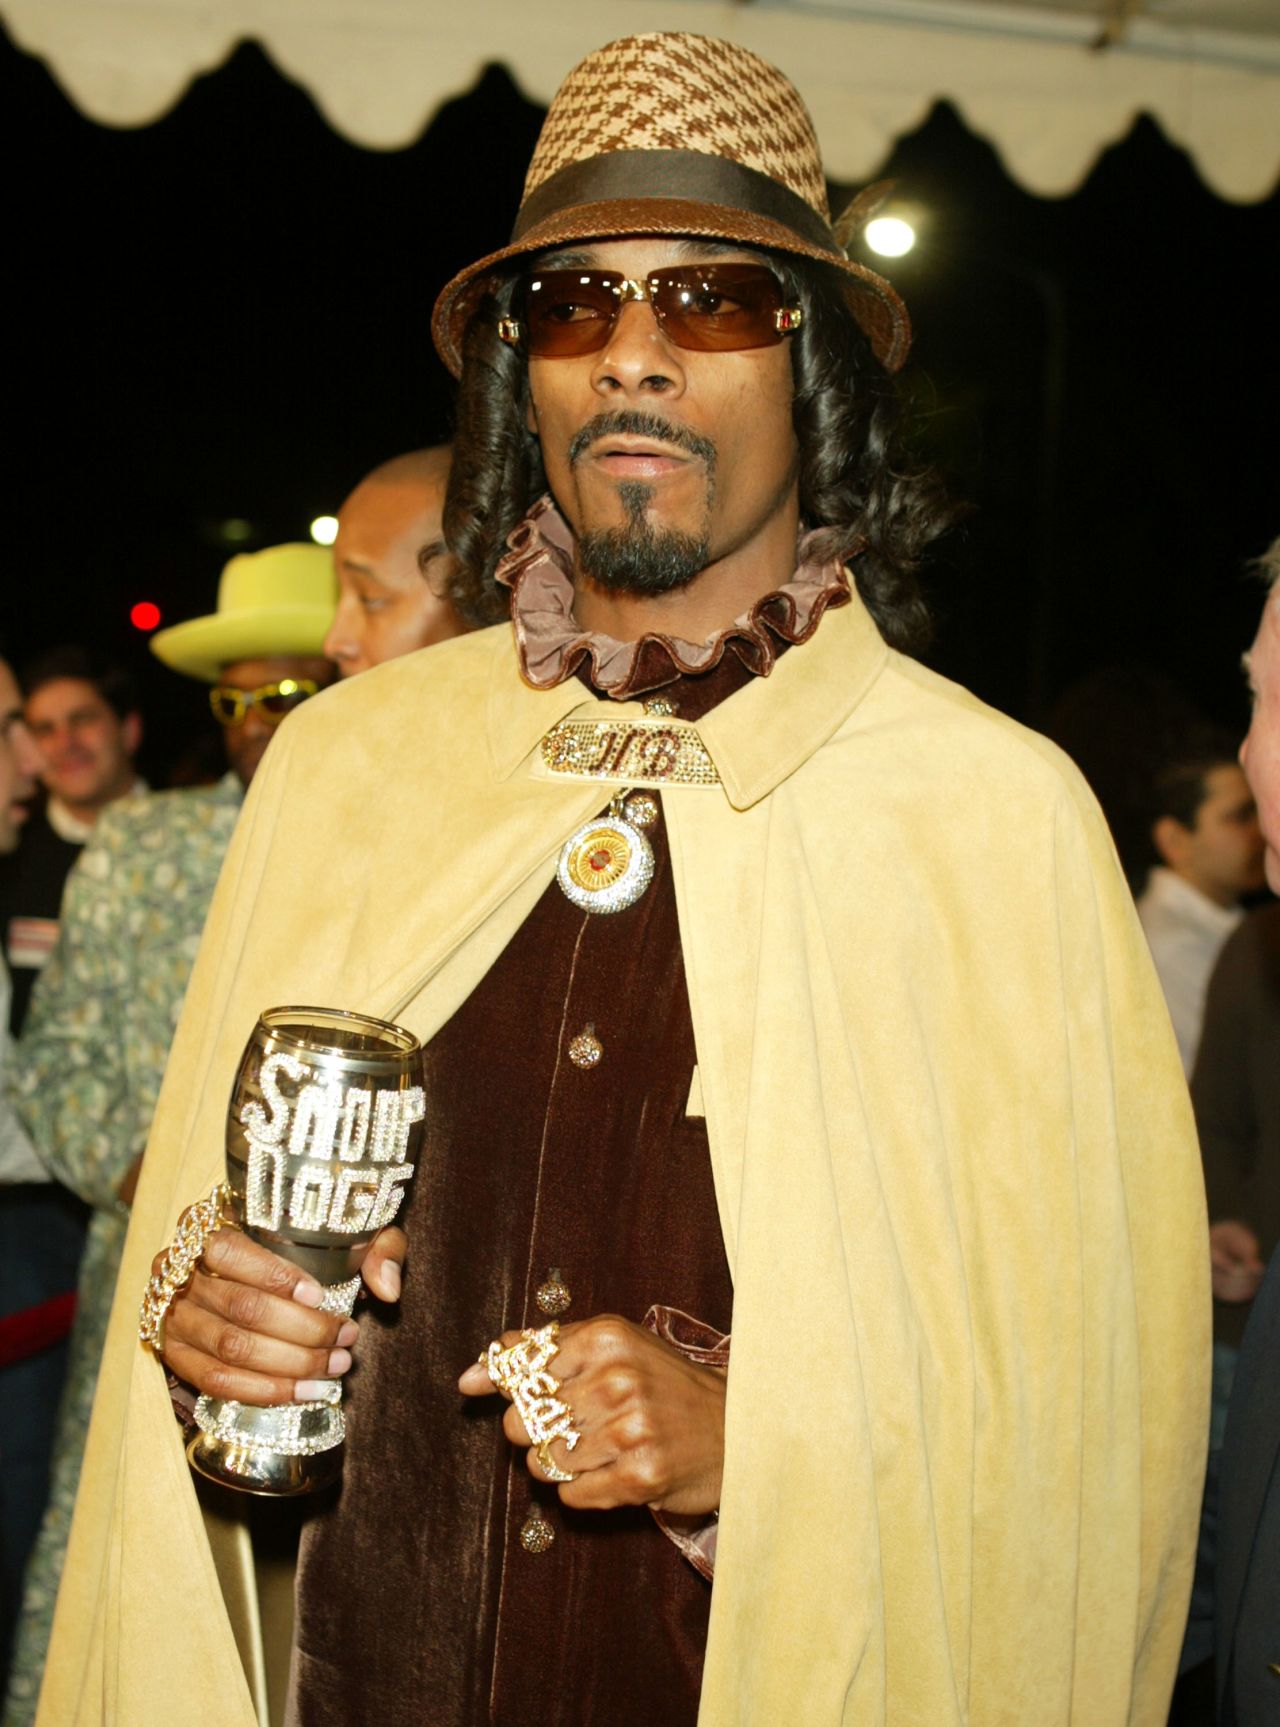 Removed from shelves in 2010 after only two years in business, it's doubtful that Snoop Dogg's streetwear line, "Rich & Infamous," did much to bolster the rapper's bank balance. <br />